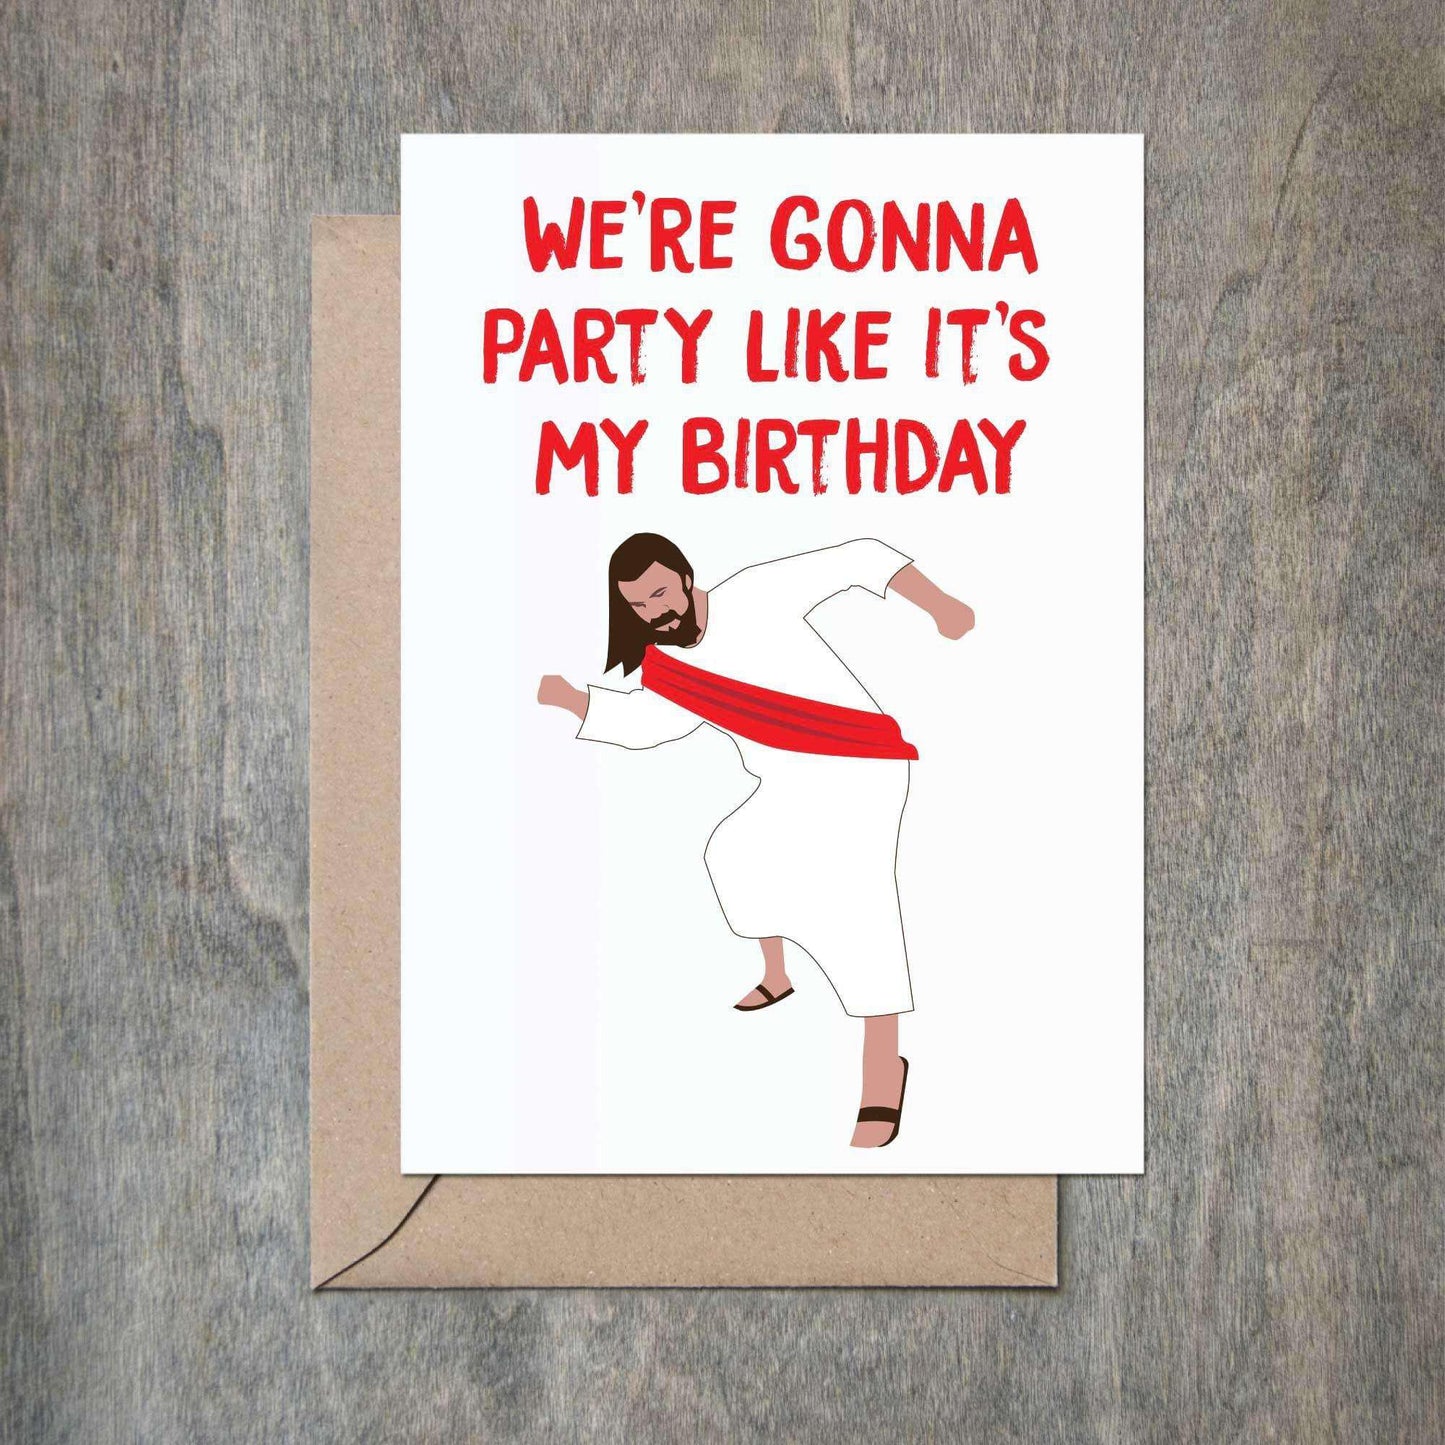 We're Gonna Like It's My Birthday Jesus Christmas Funny Holiday Card-Holiday Cards-Crimson and Clover Studio